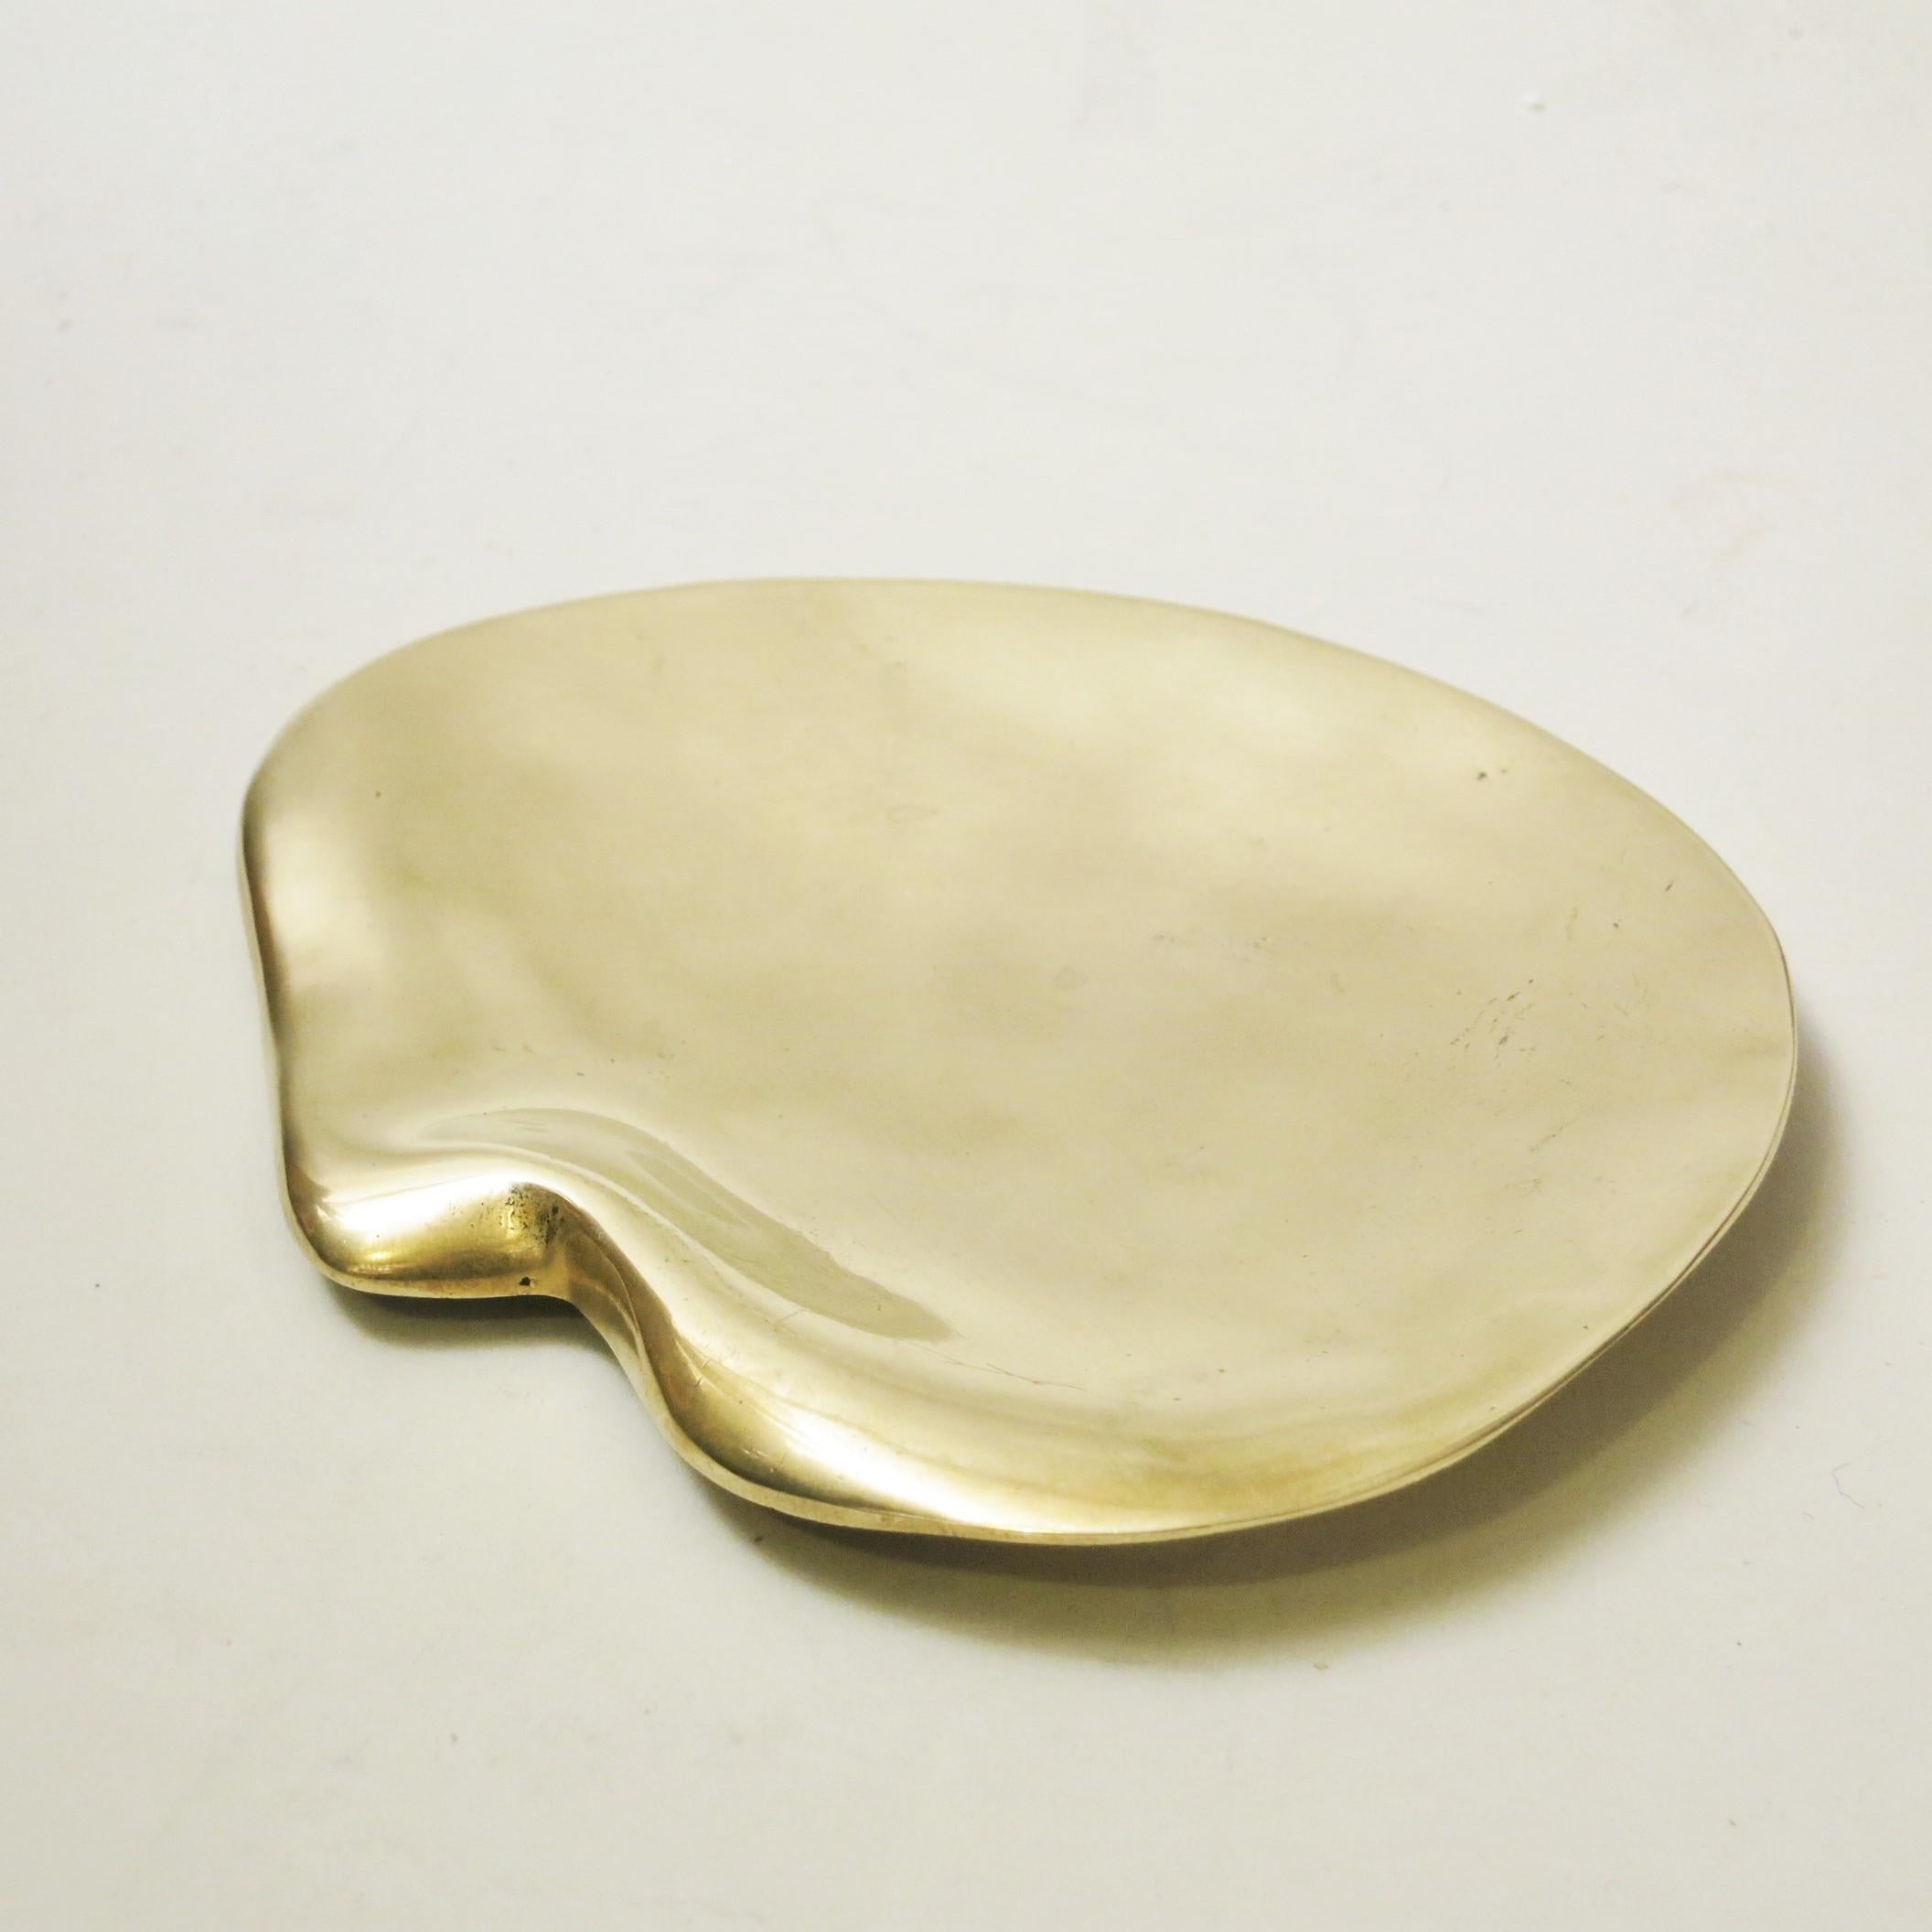 Modernist bronze tray with freeforms of the 1960s.